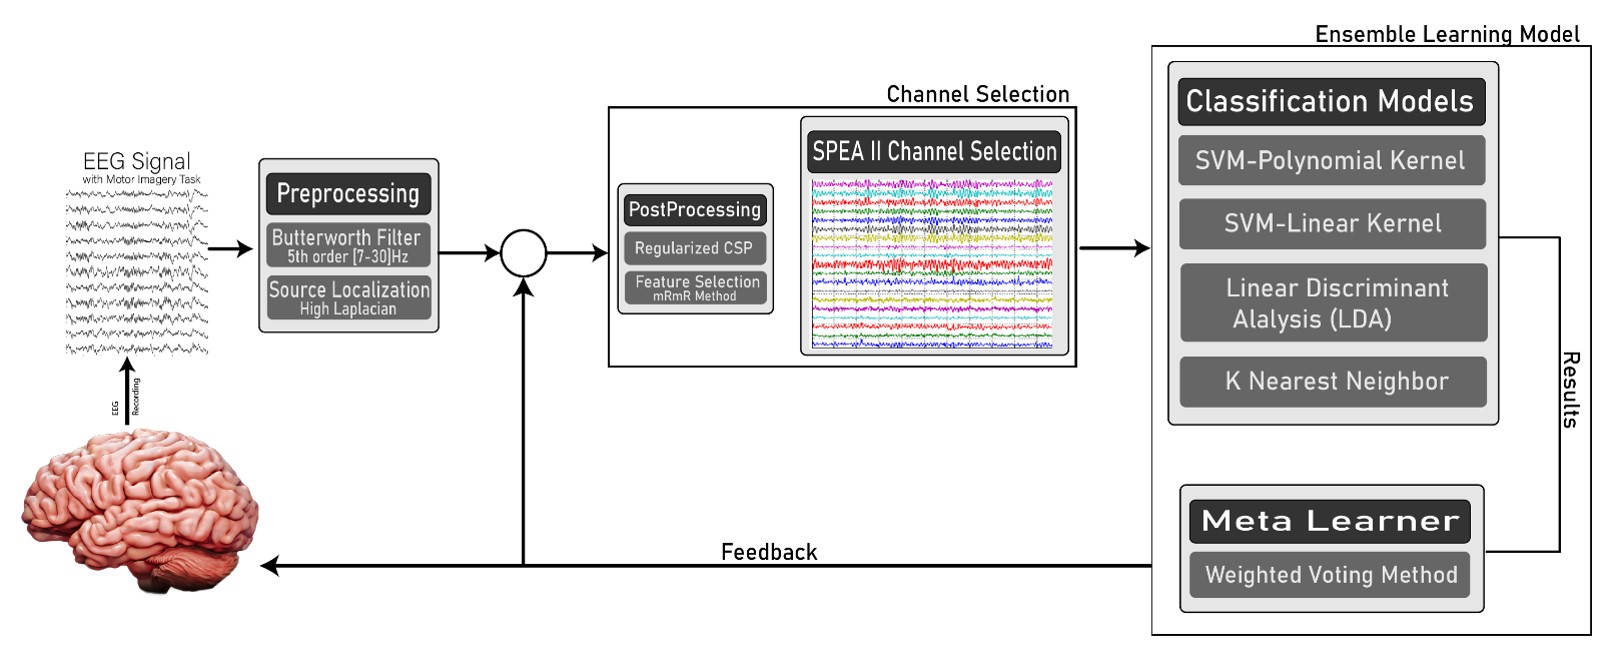 Optimizing Brain-Computer Interface Performance: Advancing EEG Signals Channel Selection through Regularized CSP and SPEA II Multi-Objective Optimization